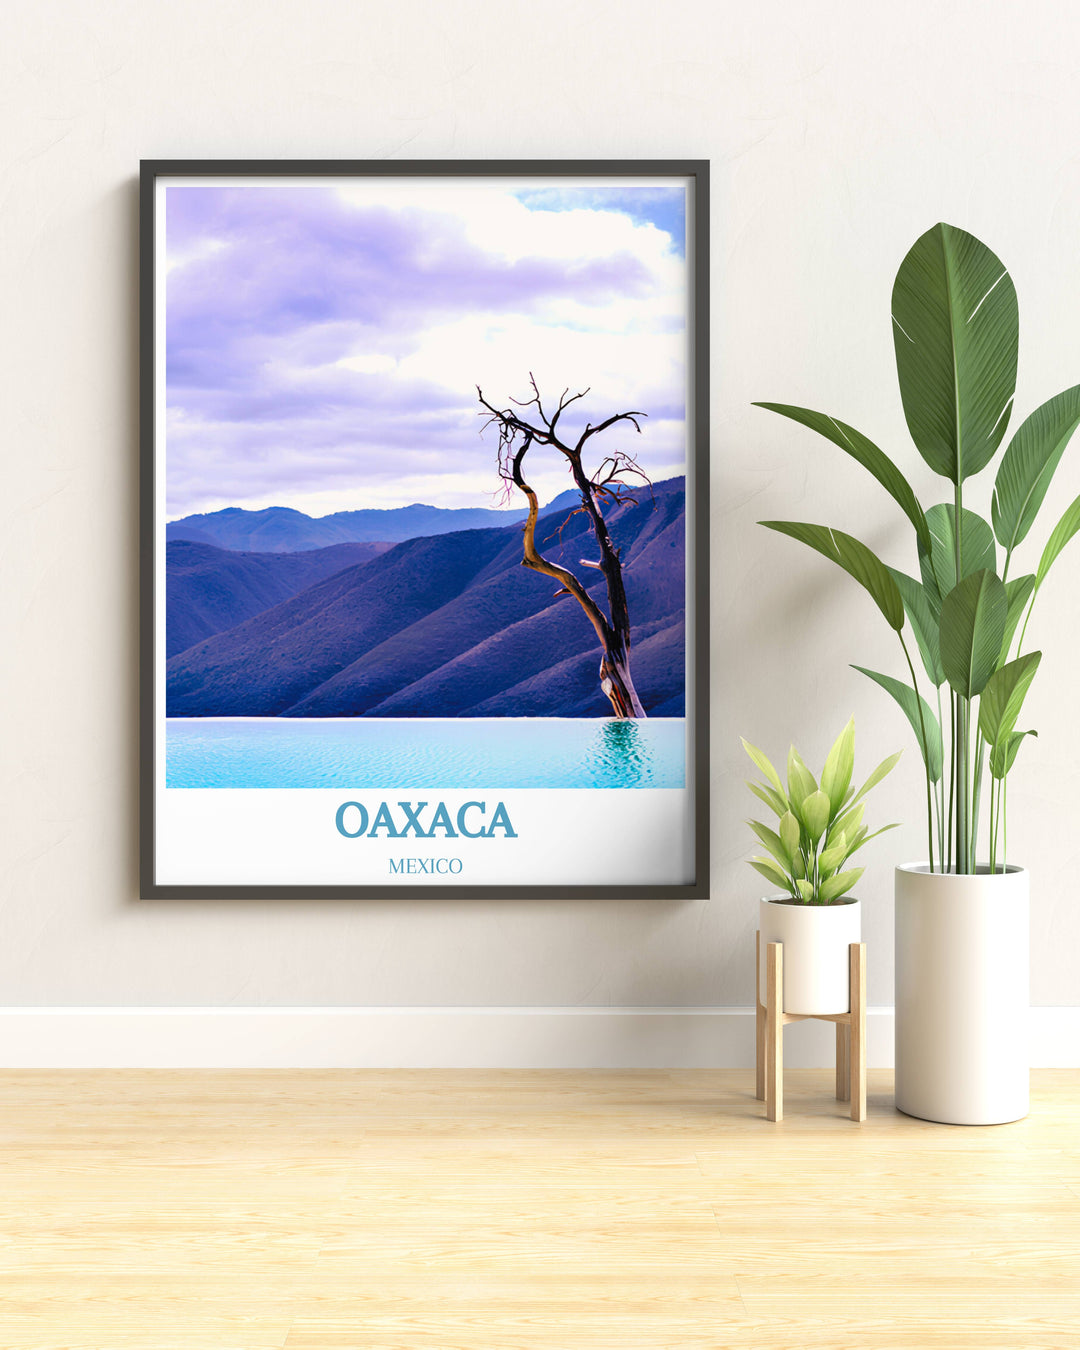 Canvas art of Hierve el Agua, Mexico, showcasing the stunning contrast between arid landscapes and refreshing natural pools.